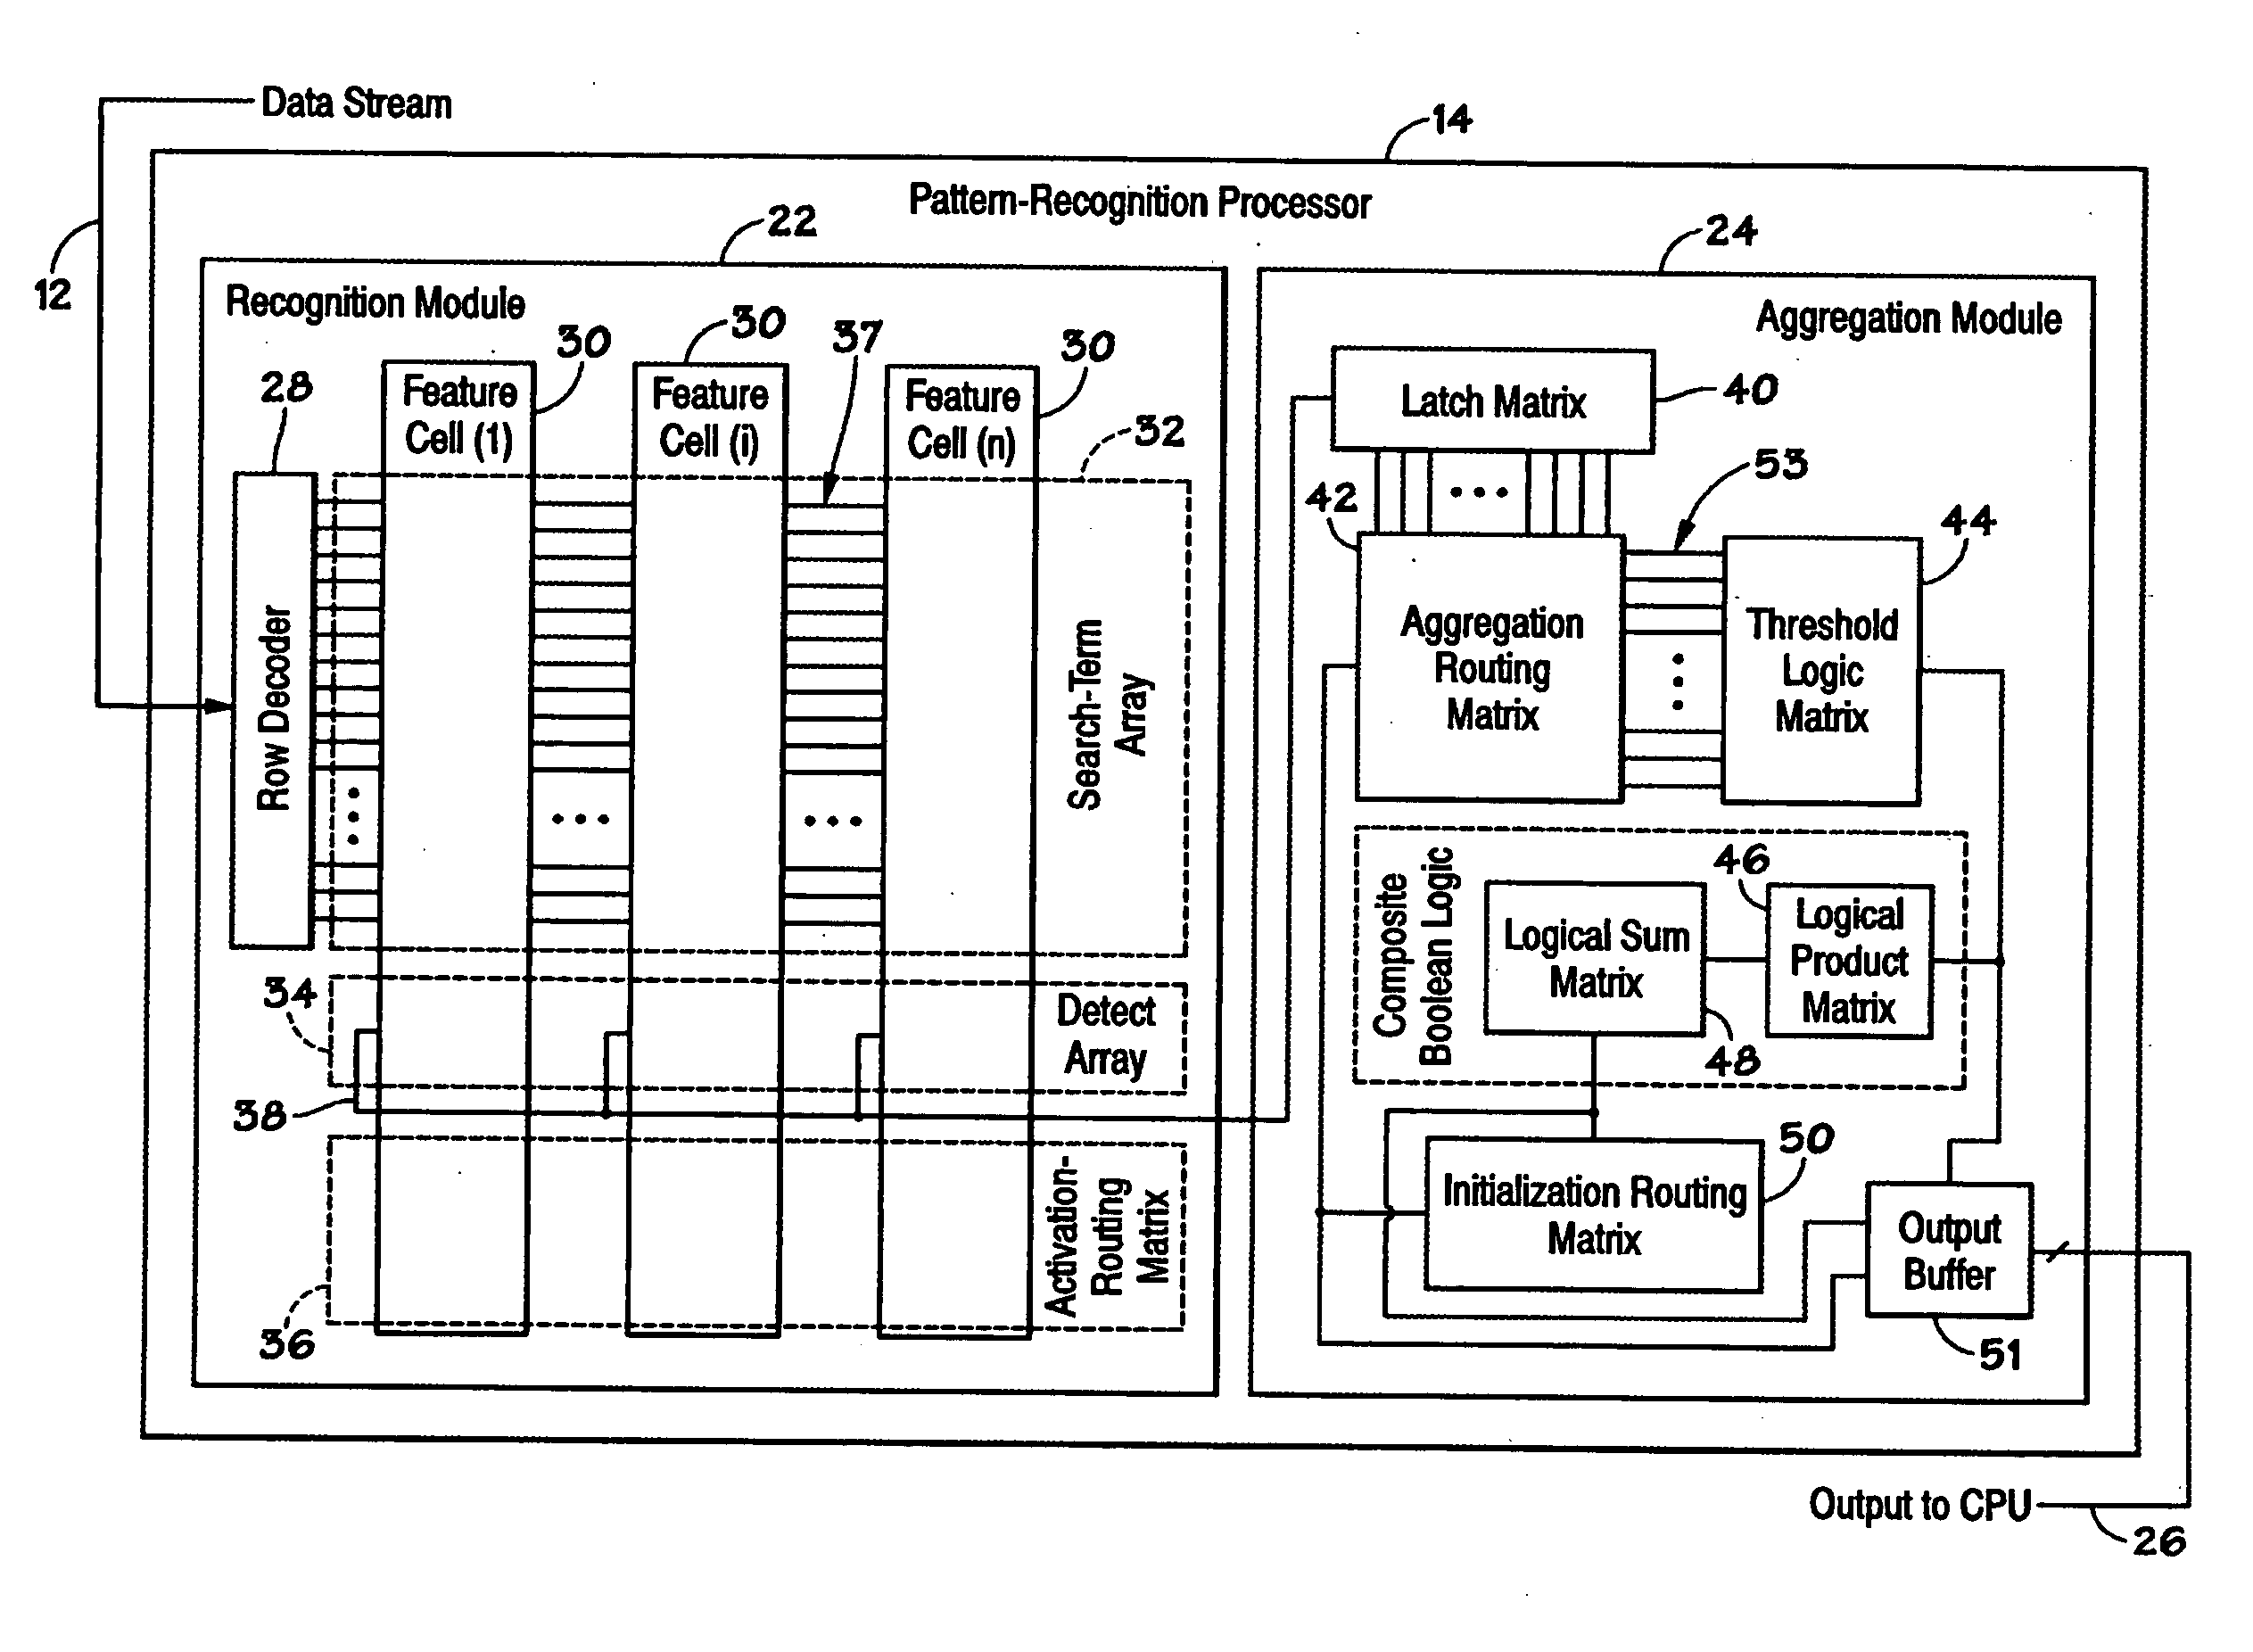 Devices, systems, and methods to synchronize simultaneous DMA parallel processing of a single data stream by multiple devices